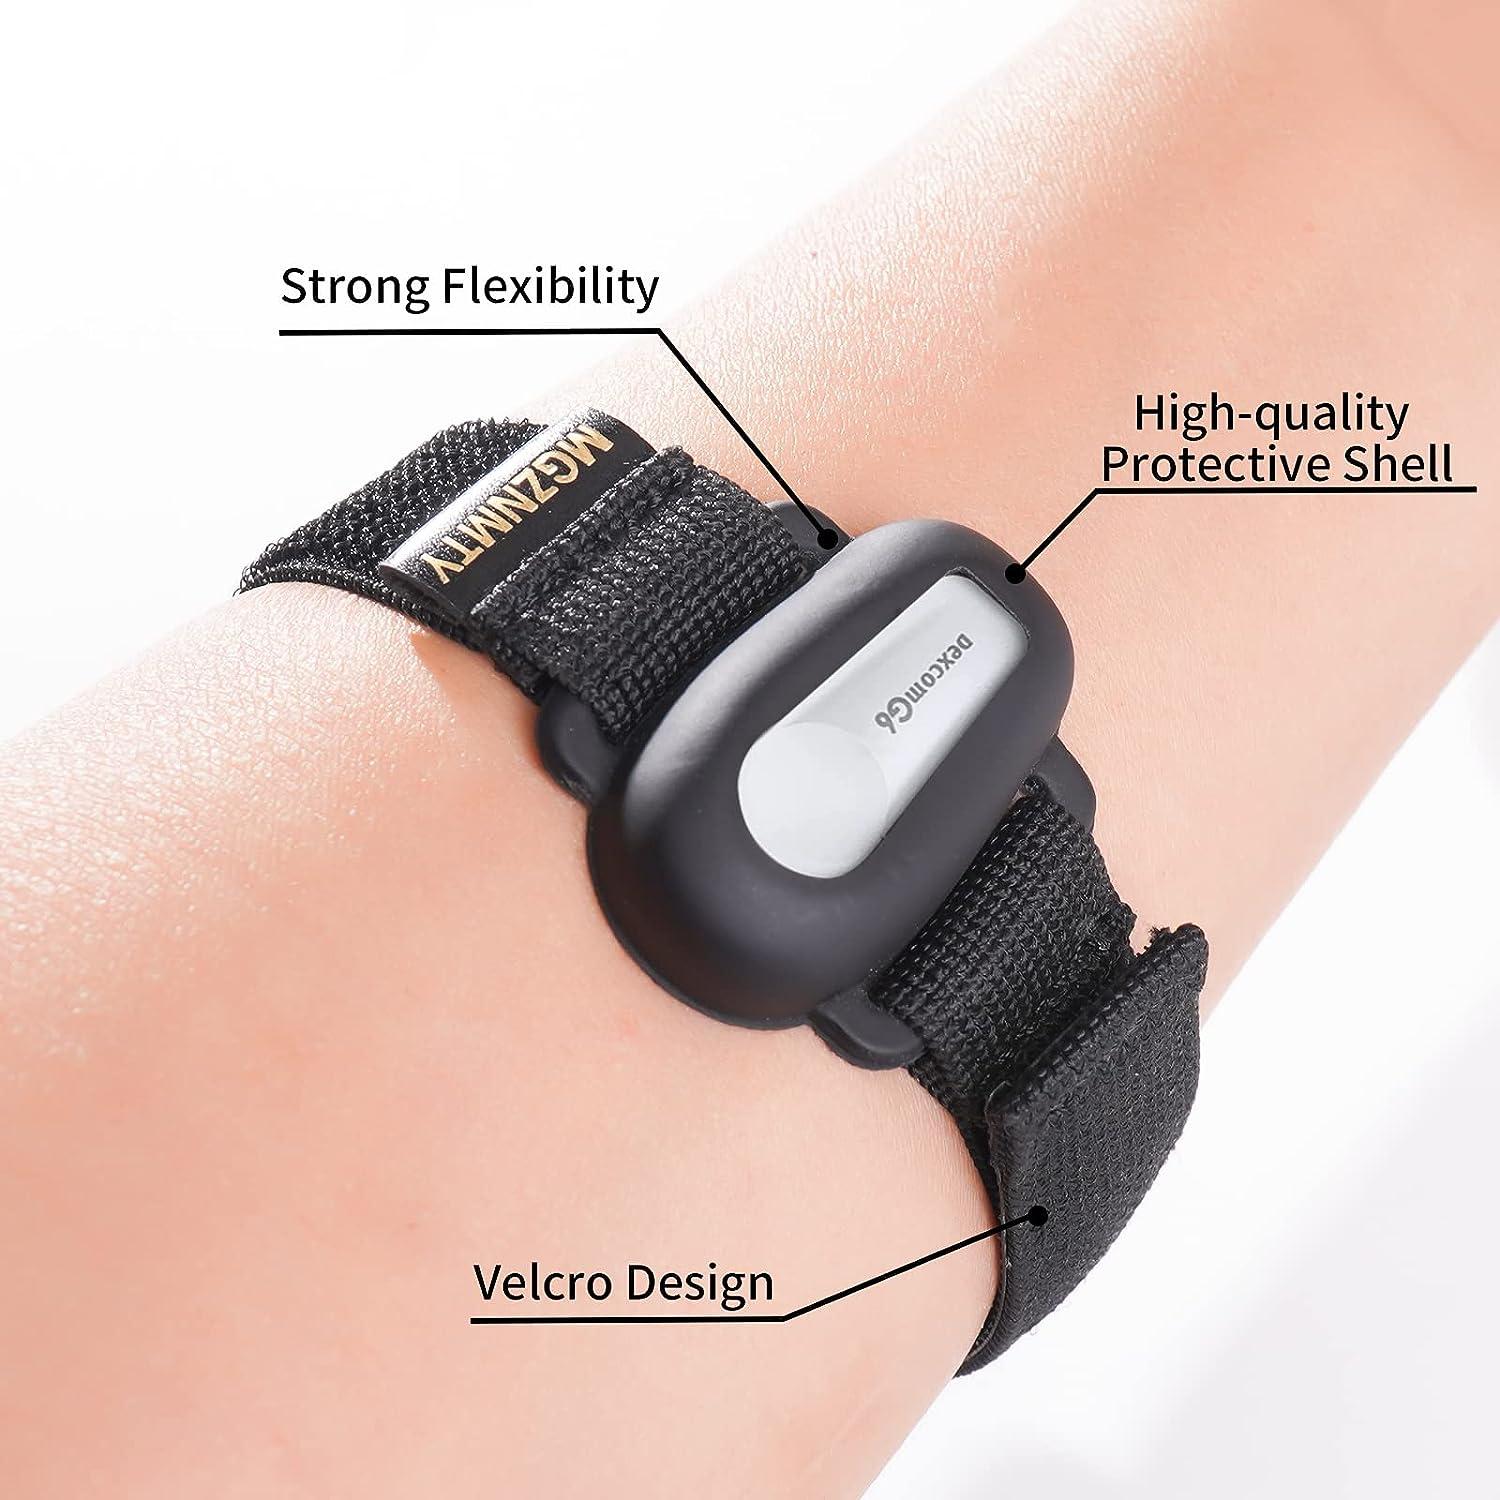 MGZNMTY Armband for Dexcom G6 Adhesive Patches Waterproof Accessories CGM  Continuous Glucose Monitor System Transmitter Sensor Cover 7 to 20  Adjustable Arm Band (Black)